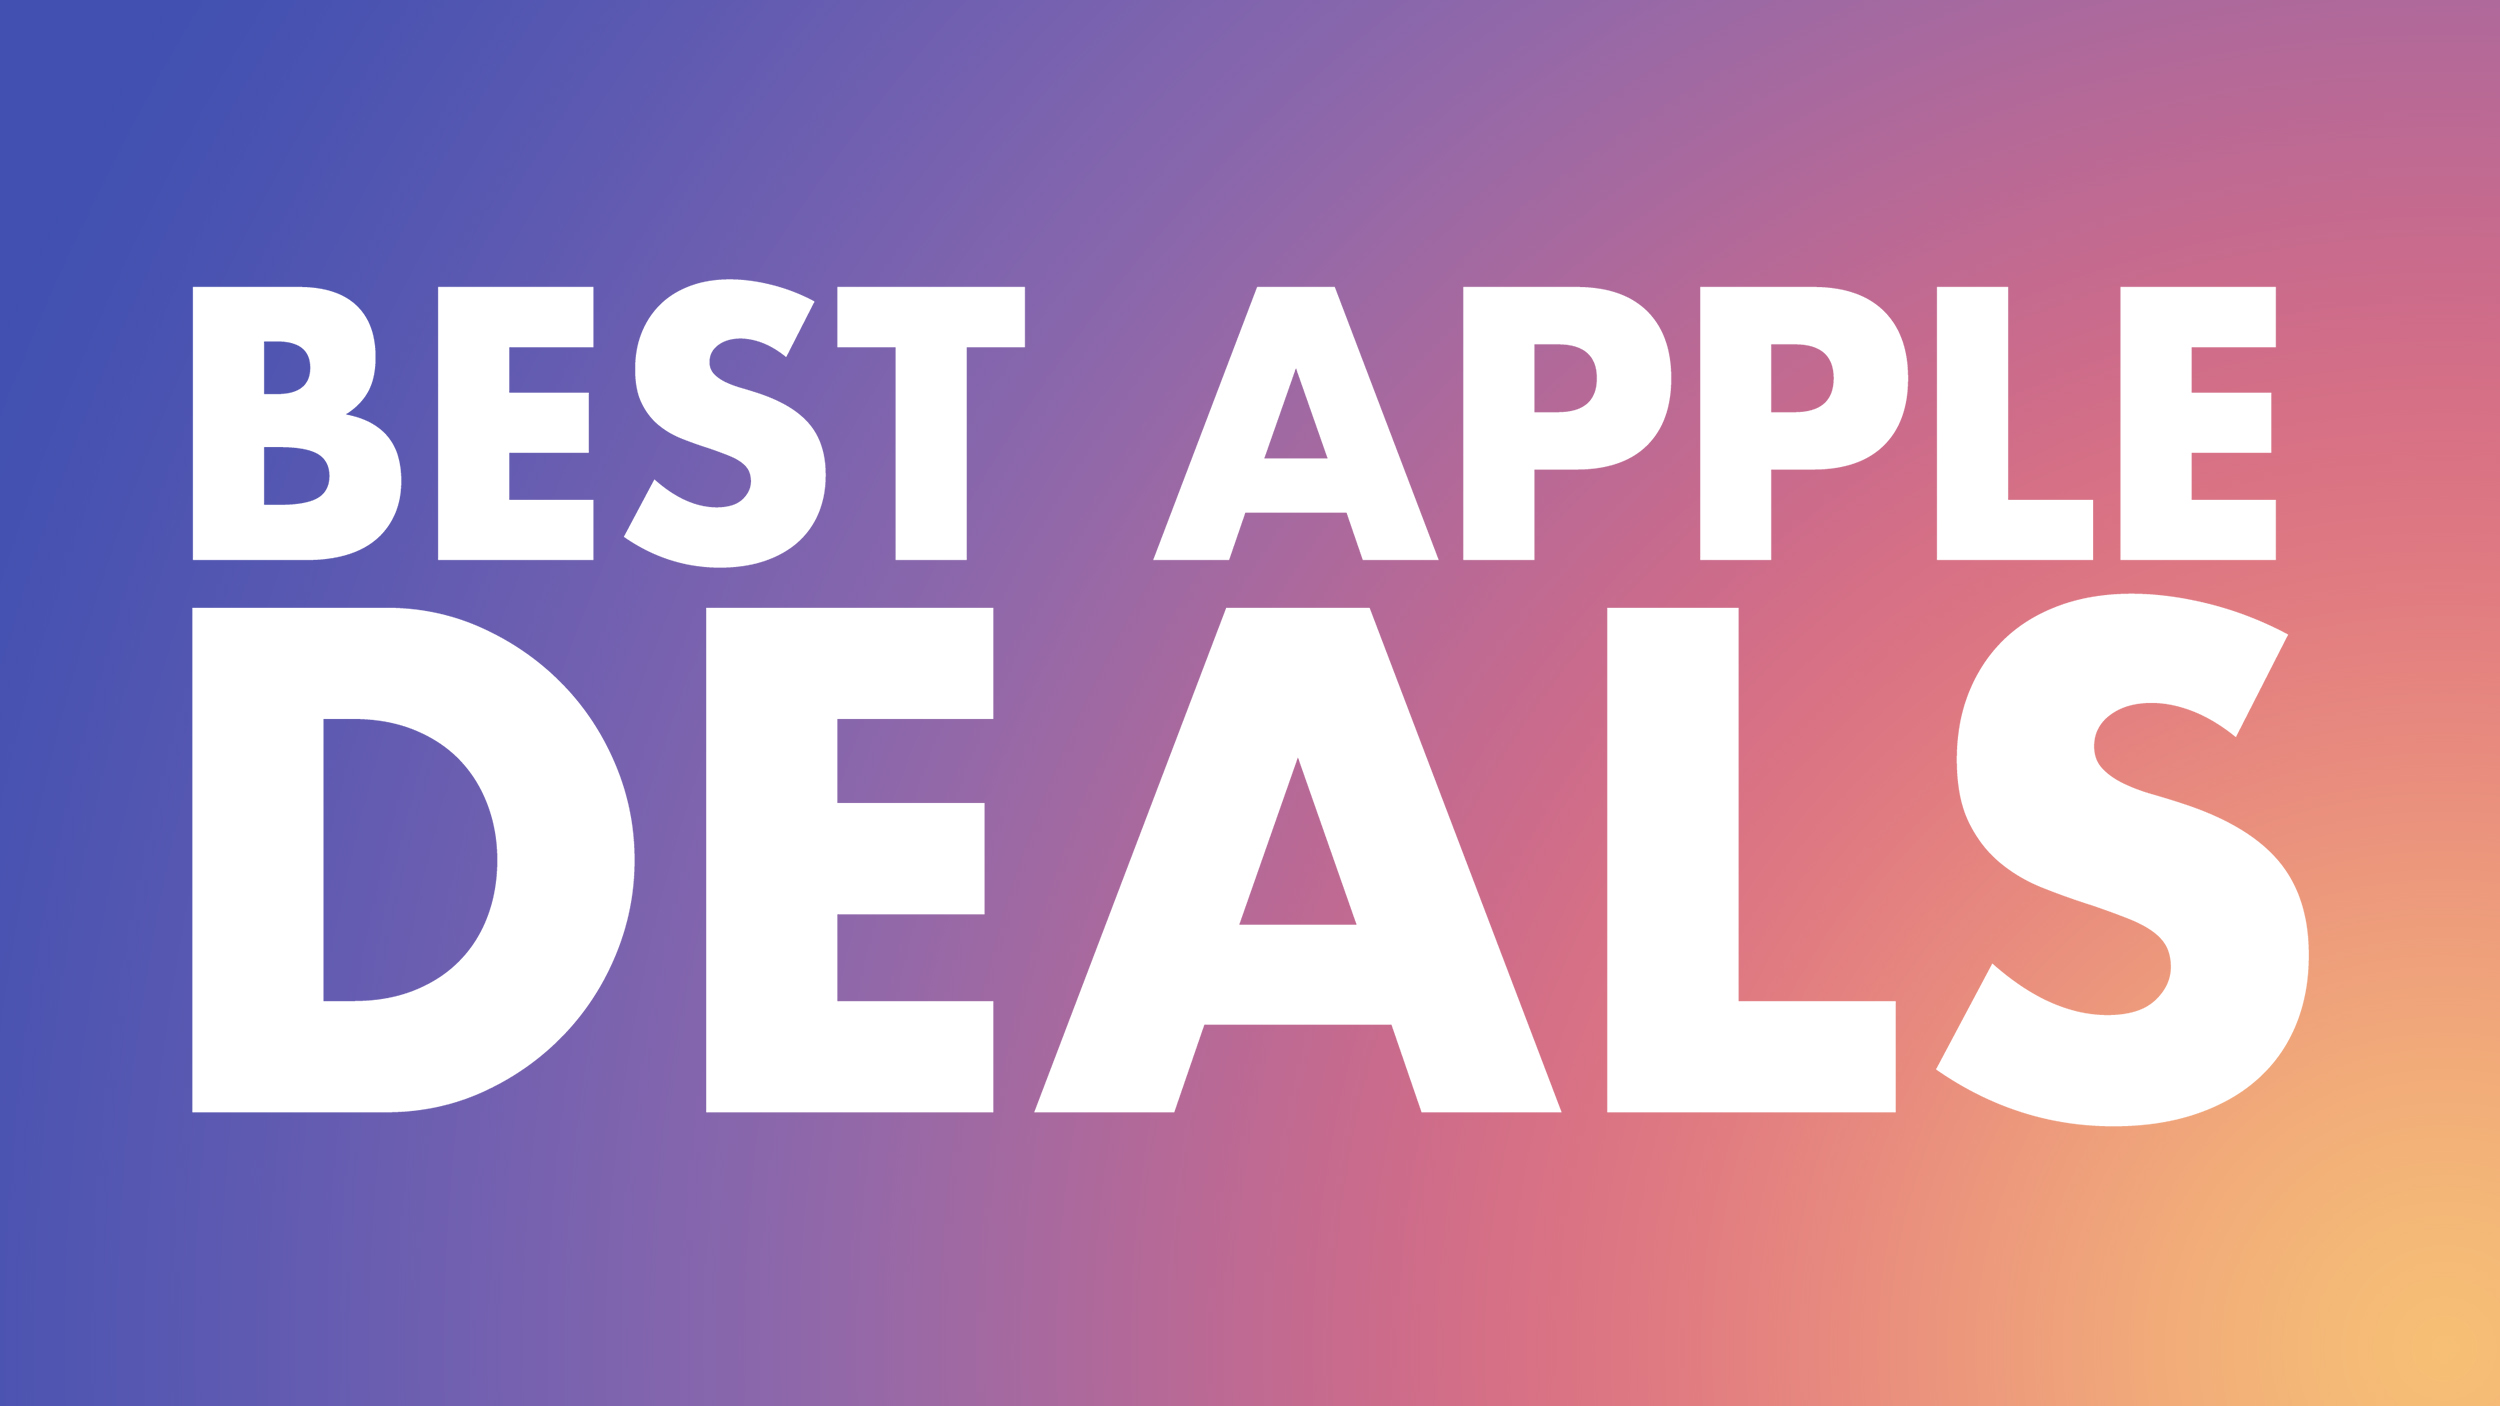 Best Apple Deals of the Week: Get Low Prices on Anker and Eufy Accessories, AirPods, Apple Pencil, and More